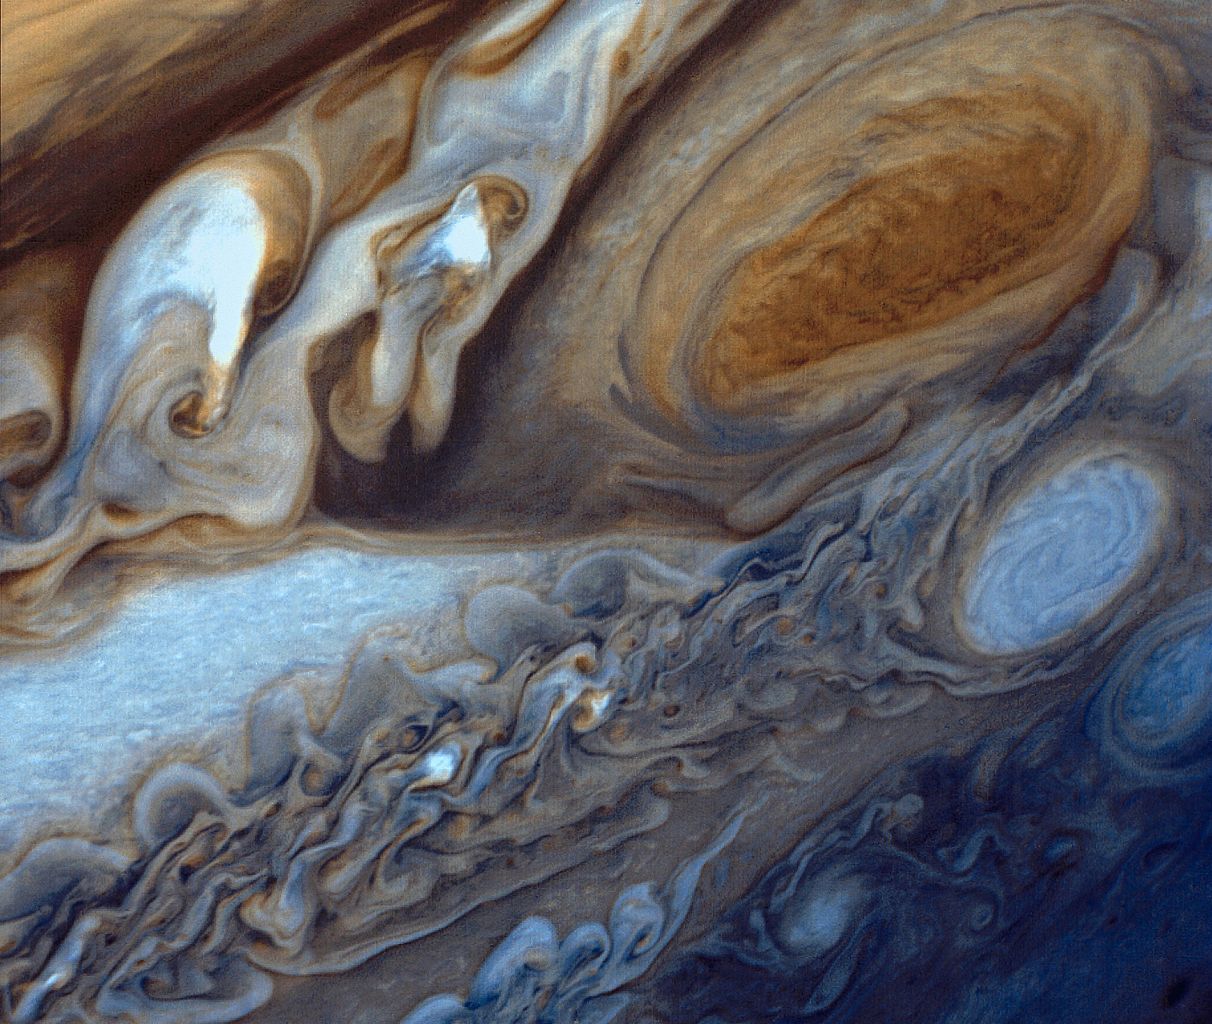 An image of the planet Jupiter showing the Great Red Spot. 